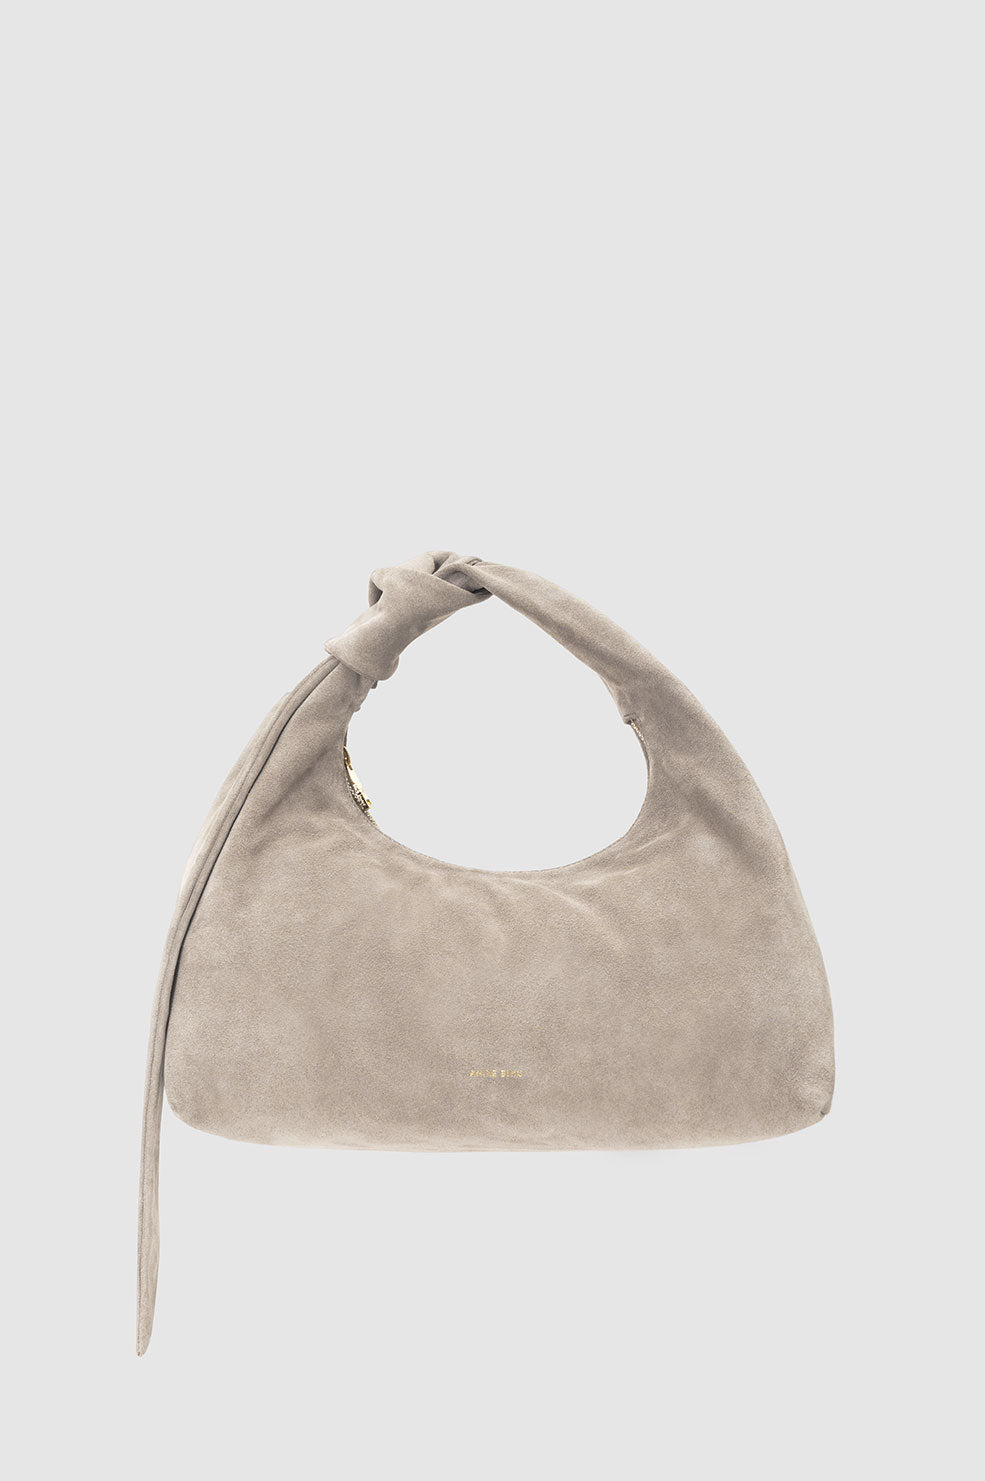 ANINE BING Grace Bag - Taupe Suede - Front View